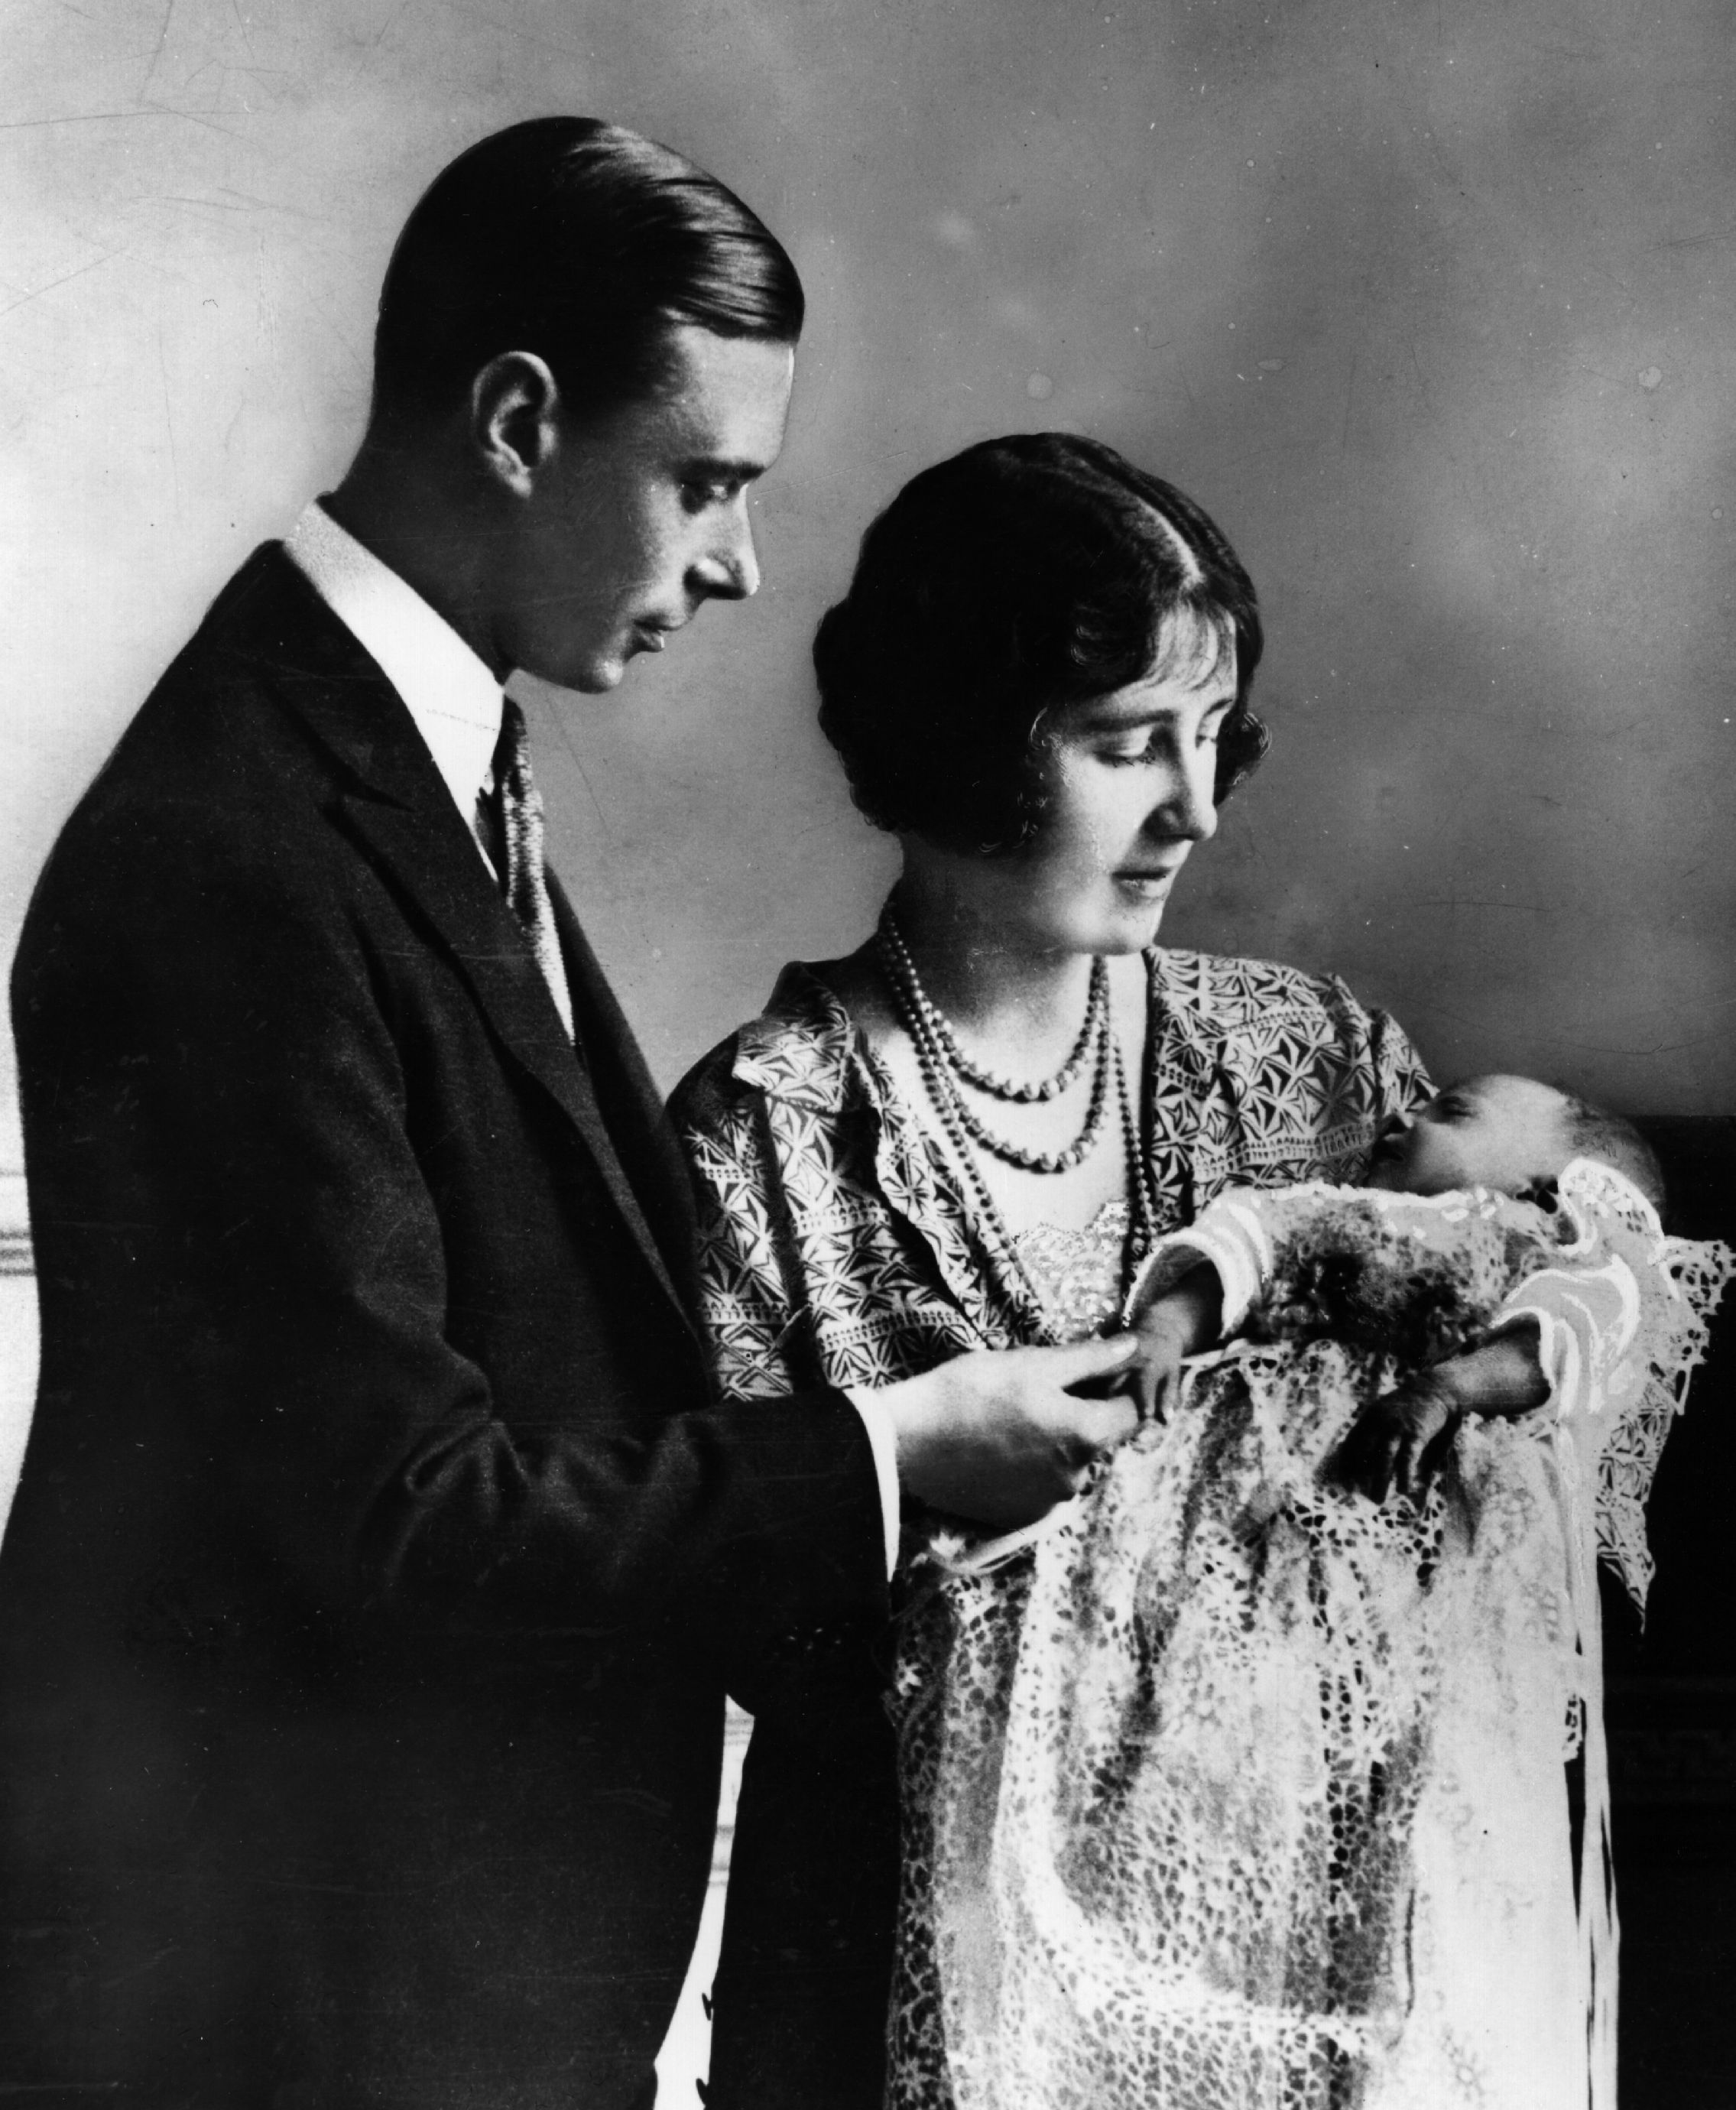 May 1926:  Future King and Queen, George, Duke of York (1895-1952) and Elizabeth Duchess of York (1900-2002) holding their first child, future Monarch Princess Elizabeth, at her christening ceremony.  